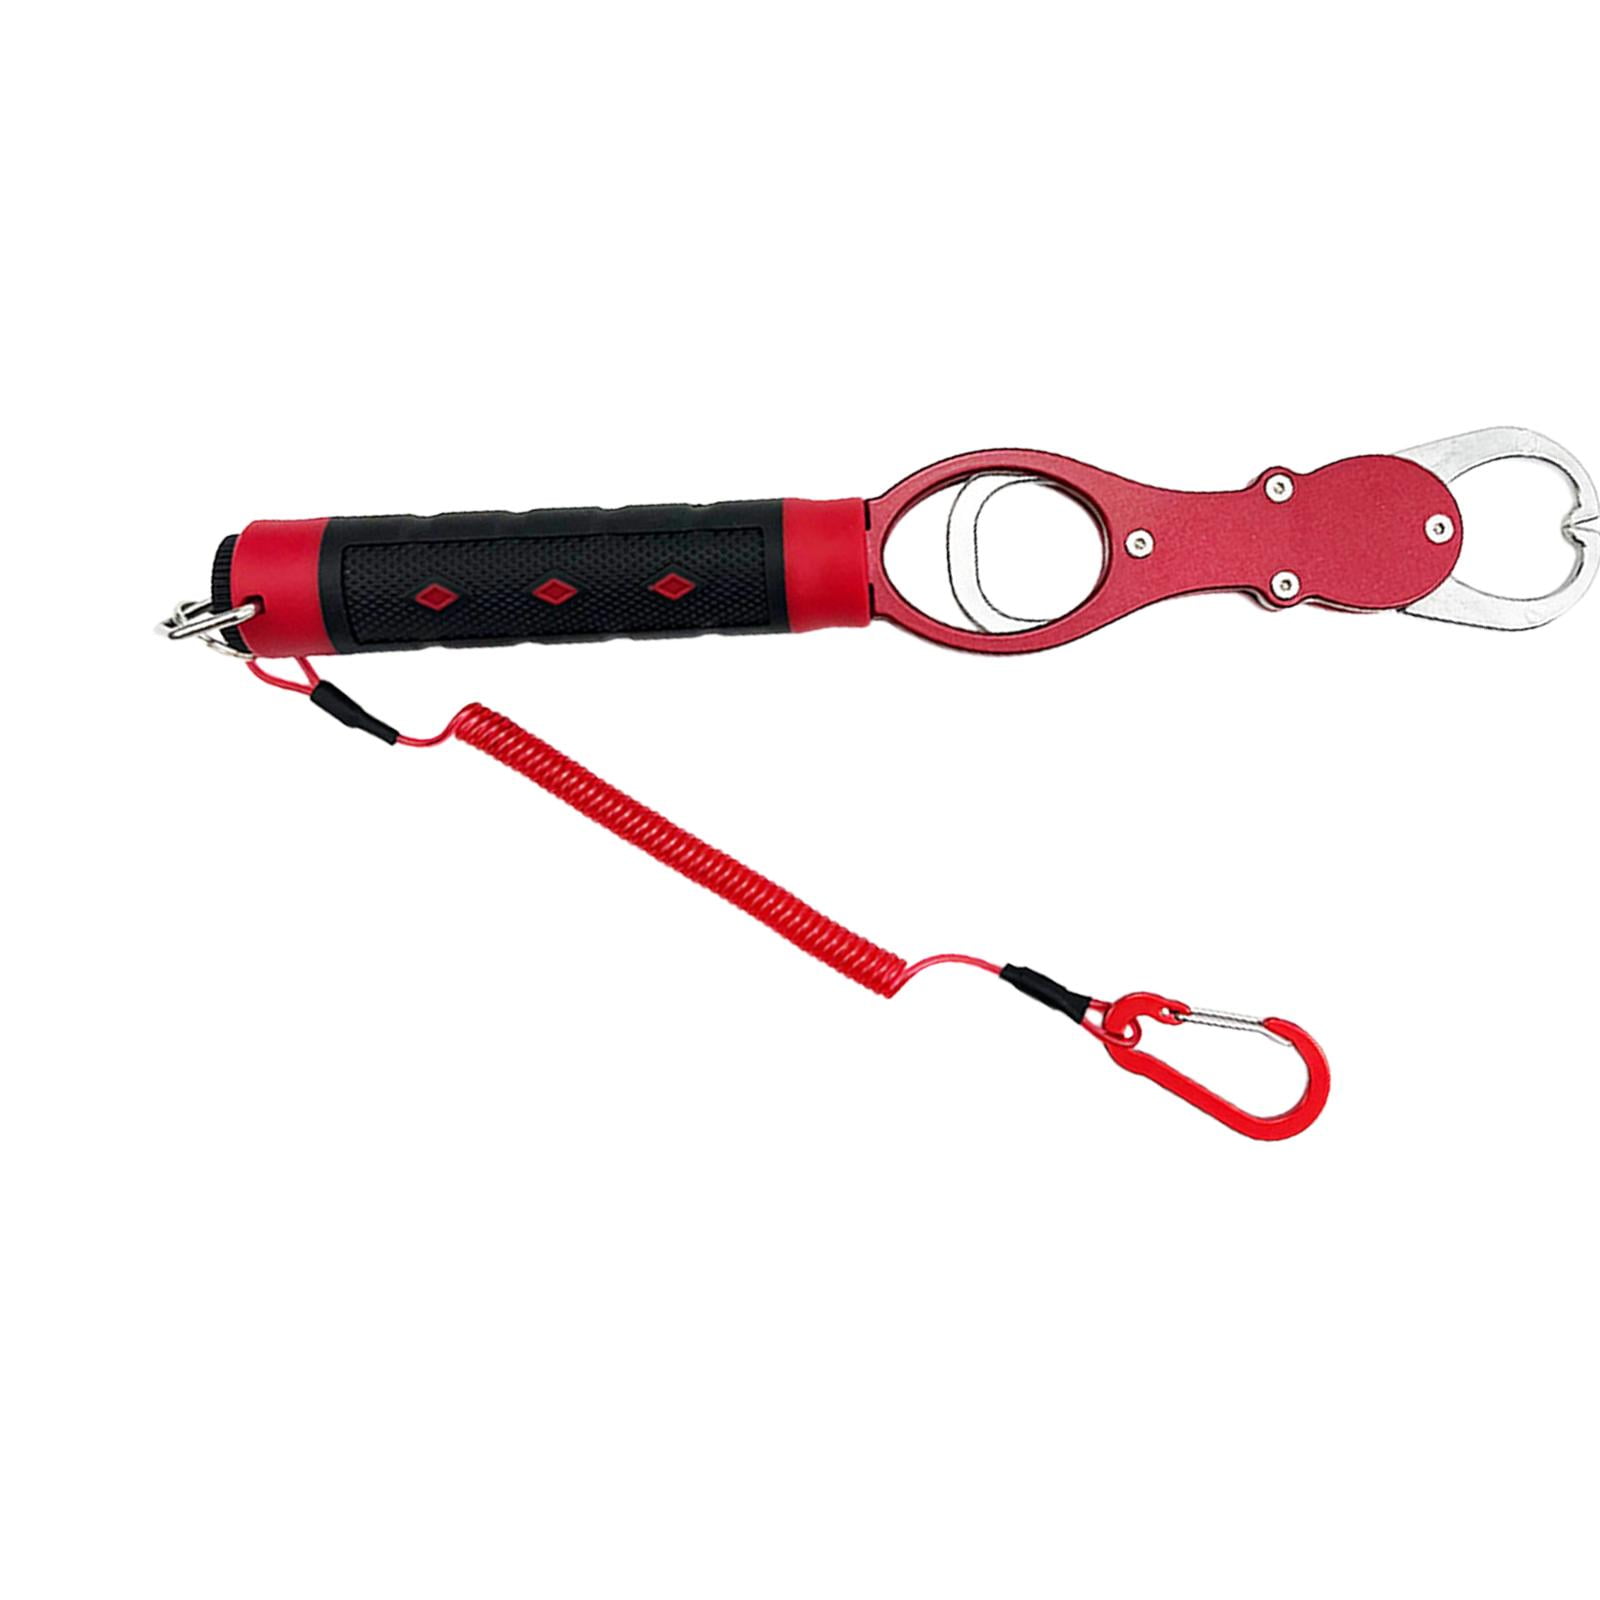 Buy UJEAVETTE® Fishing Lip Gripper Fish Grabber Tool Tackle Clamp Fly  Fishing Gear Red Online at Low Prices in India 